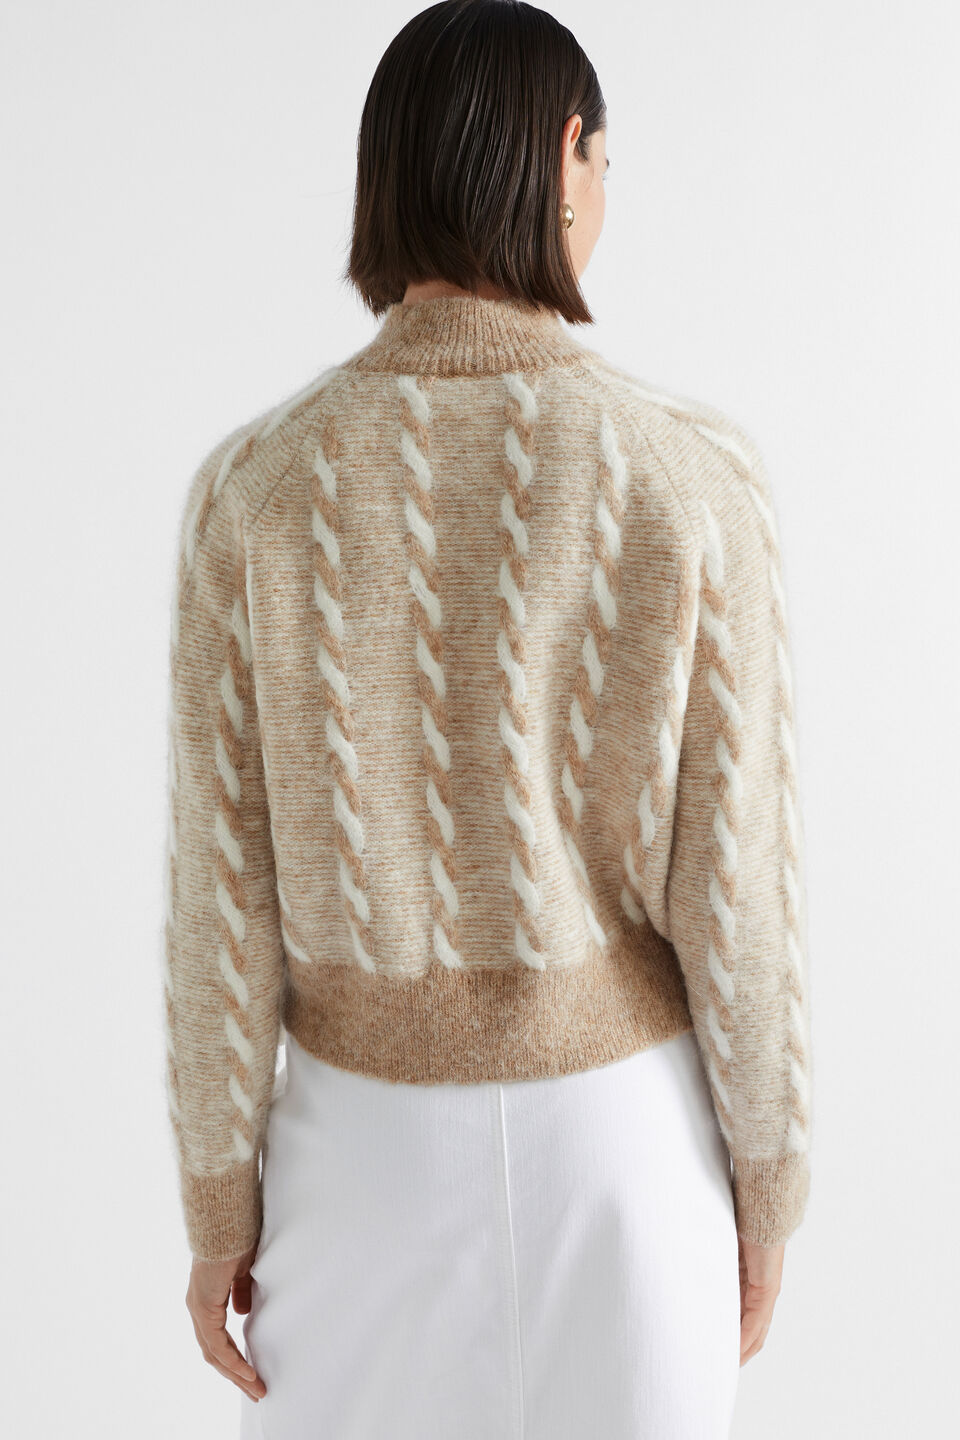 Two Tone Cable Knit  Champagne Beige Twist